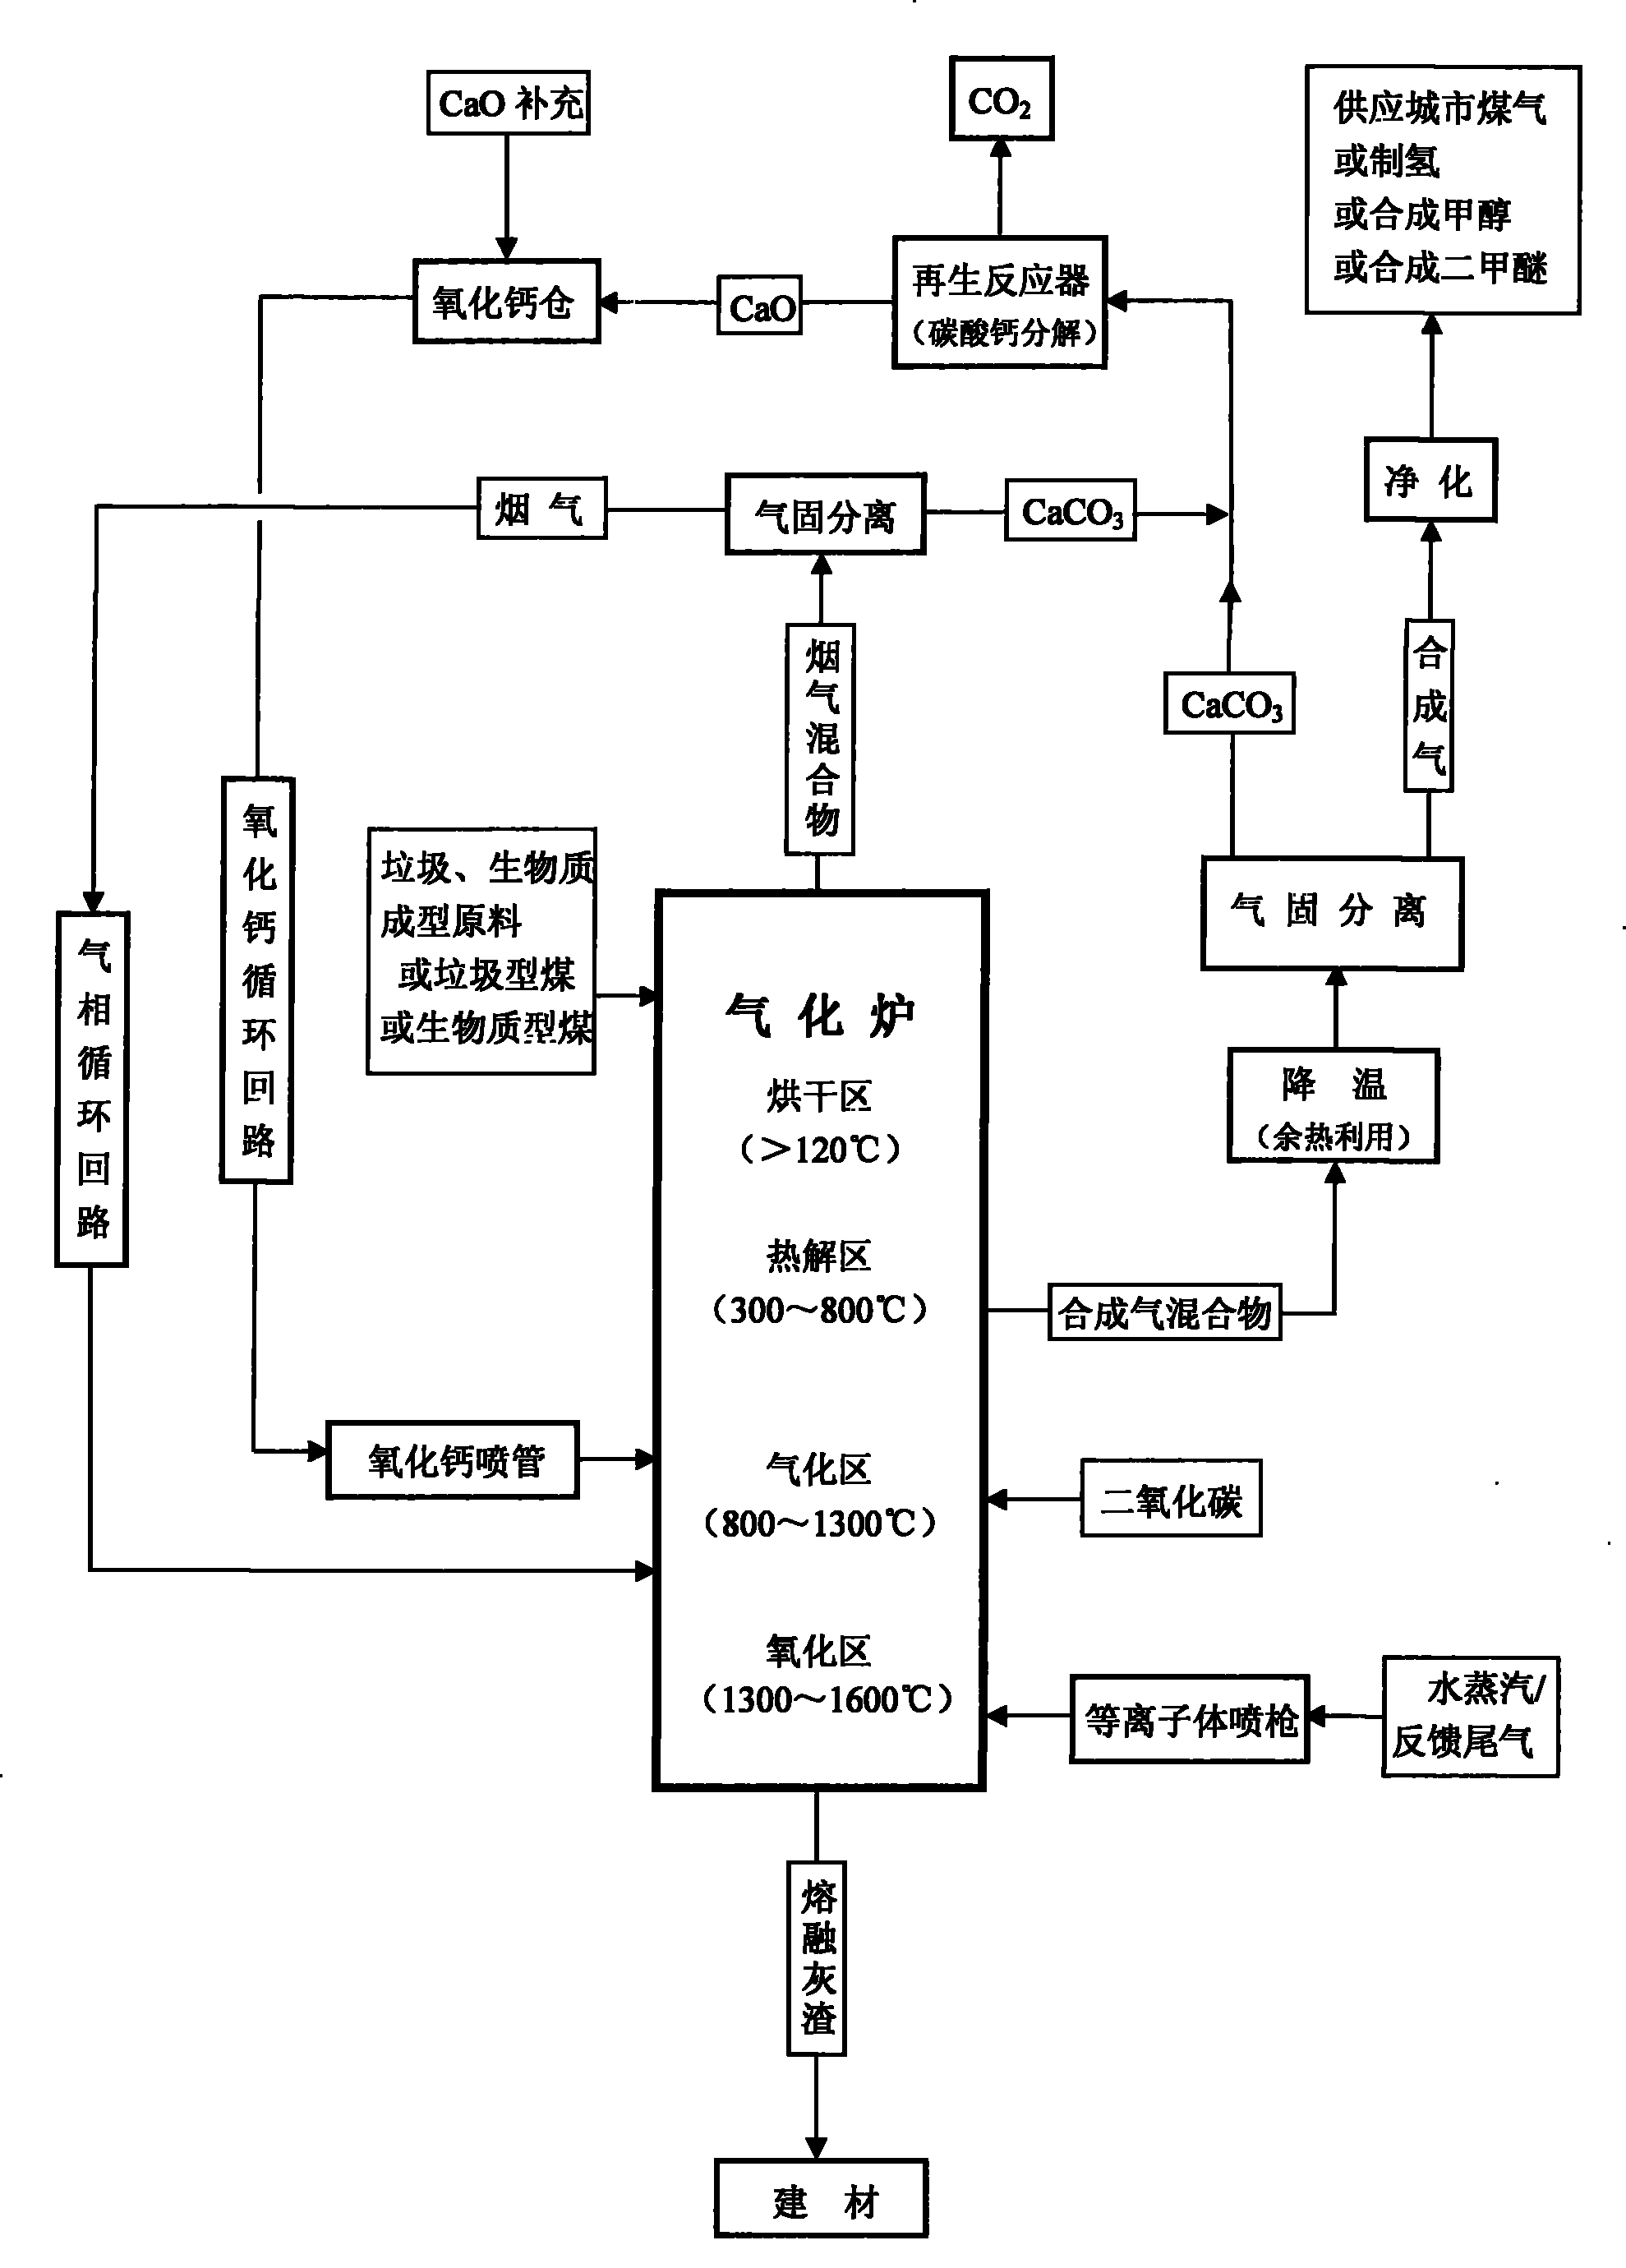 Gasification process for producing synthesis gas from garbage and biomass raw materials